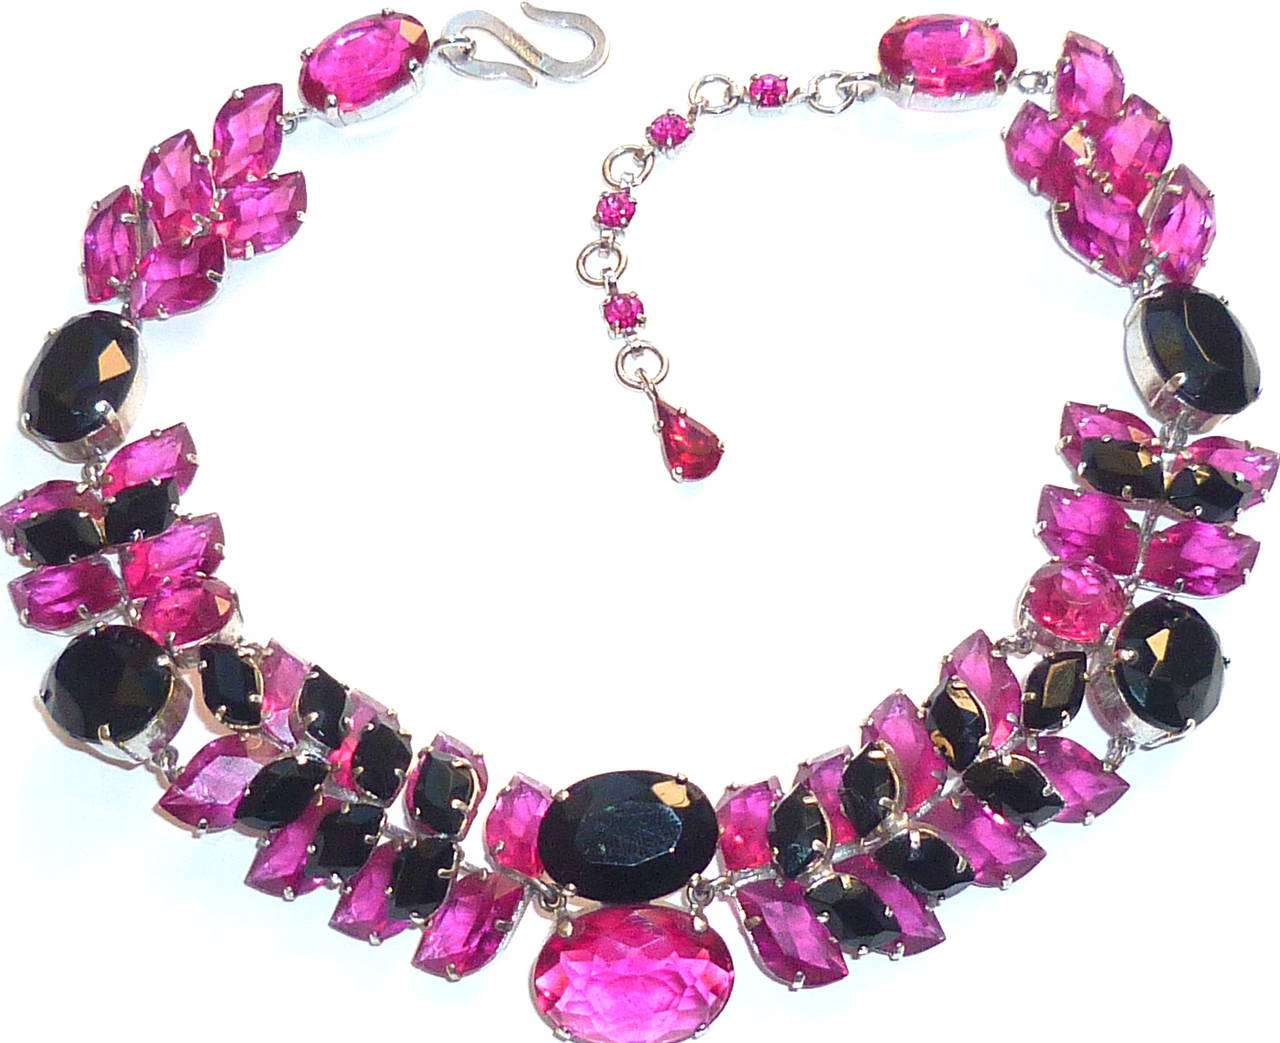 A beautiful 1959 Christian Dior choker necklace, made of  black and pink large Swarovsky crystals in a 3-dimensional rhodium plated setting. Marked Christian Dior 1959 Germany on clasp. Length end to end 15 3/4 inches x Width 1 1/8 inches. Excellent